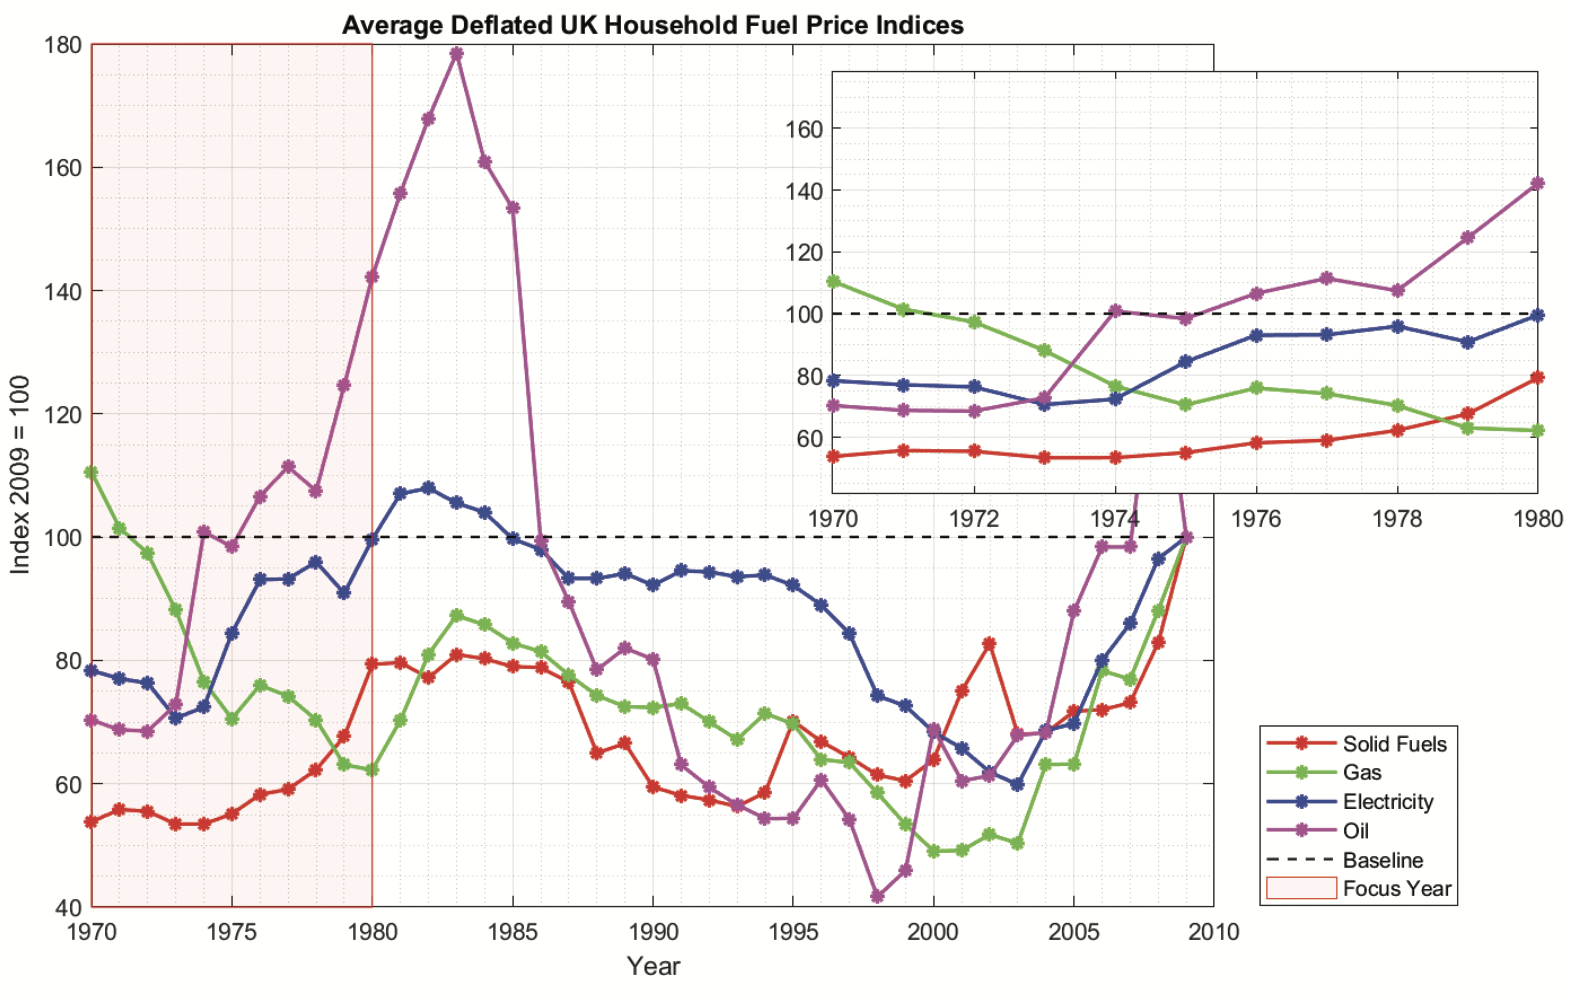 Figure 1: Average deflated UK household fuel price indices (2009 = 100). Source: Palmer, Cooper, Energy Fact File 2011, Table 3d, 66 (cf. note 3).